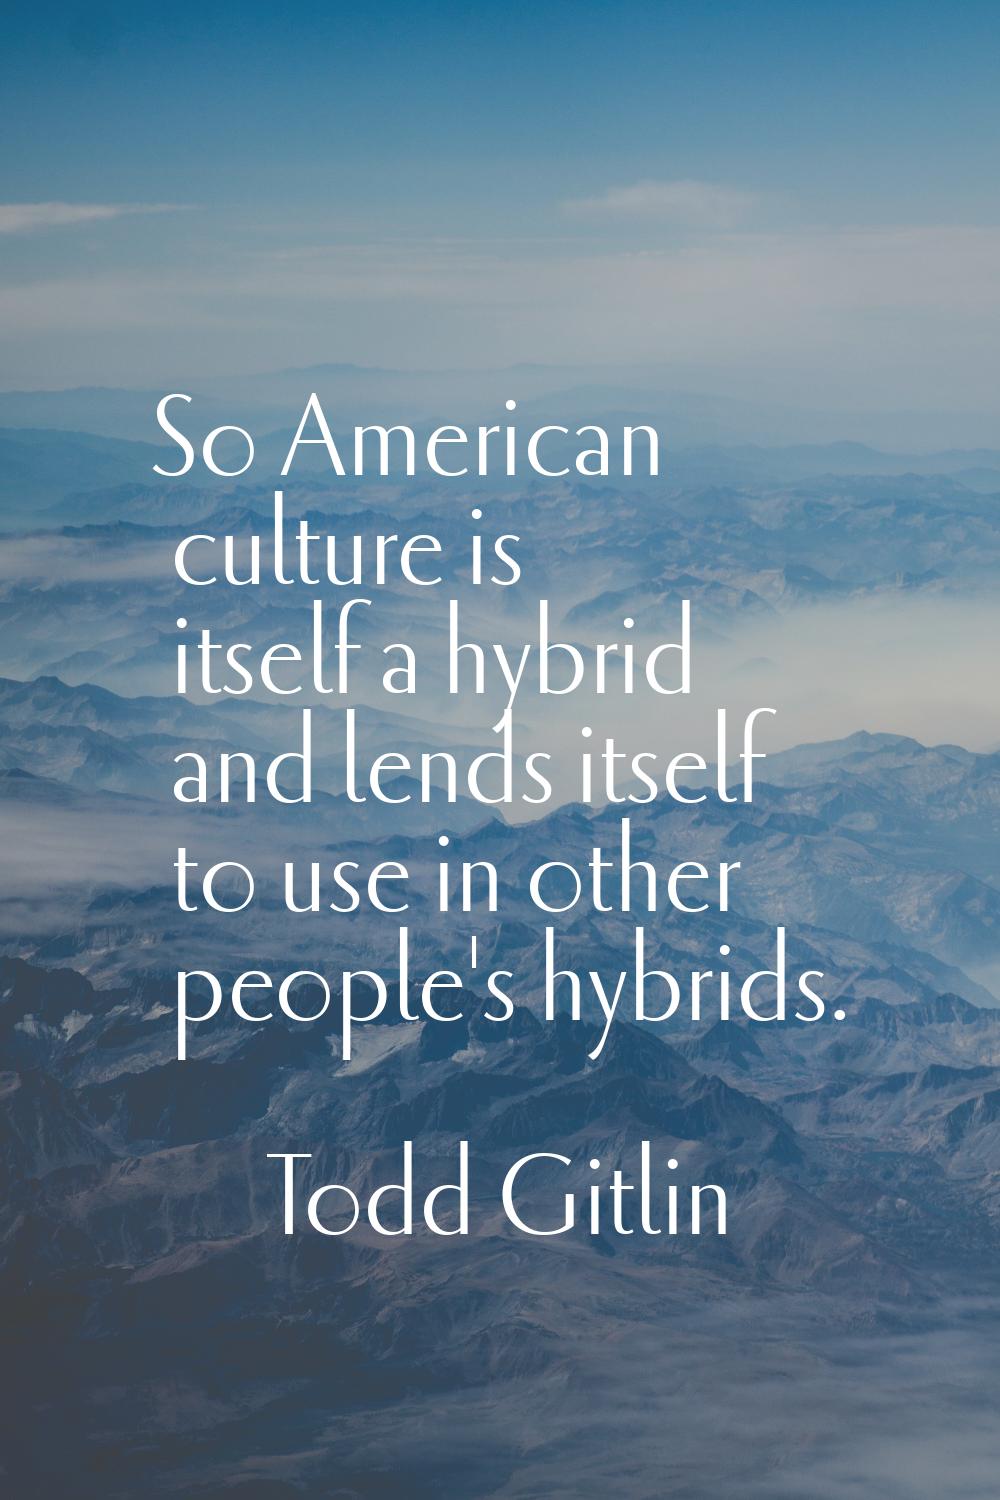 So American culture is itself a hybrid and lends itself to use in other people's hybrids.